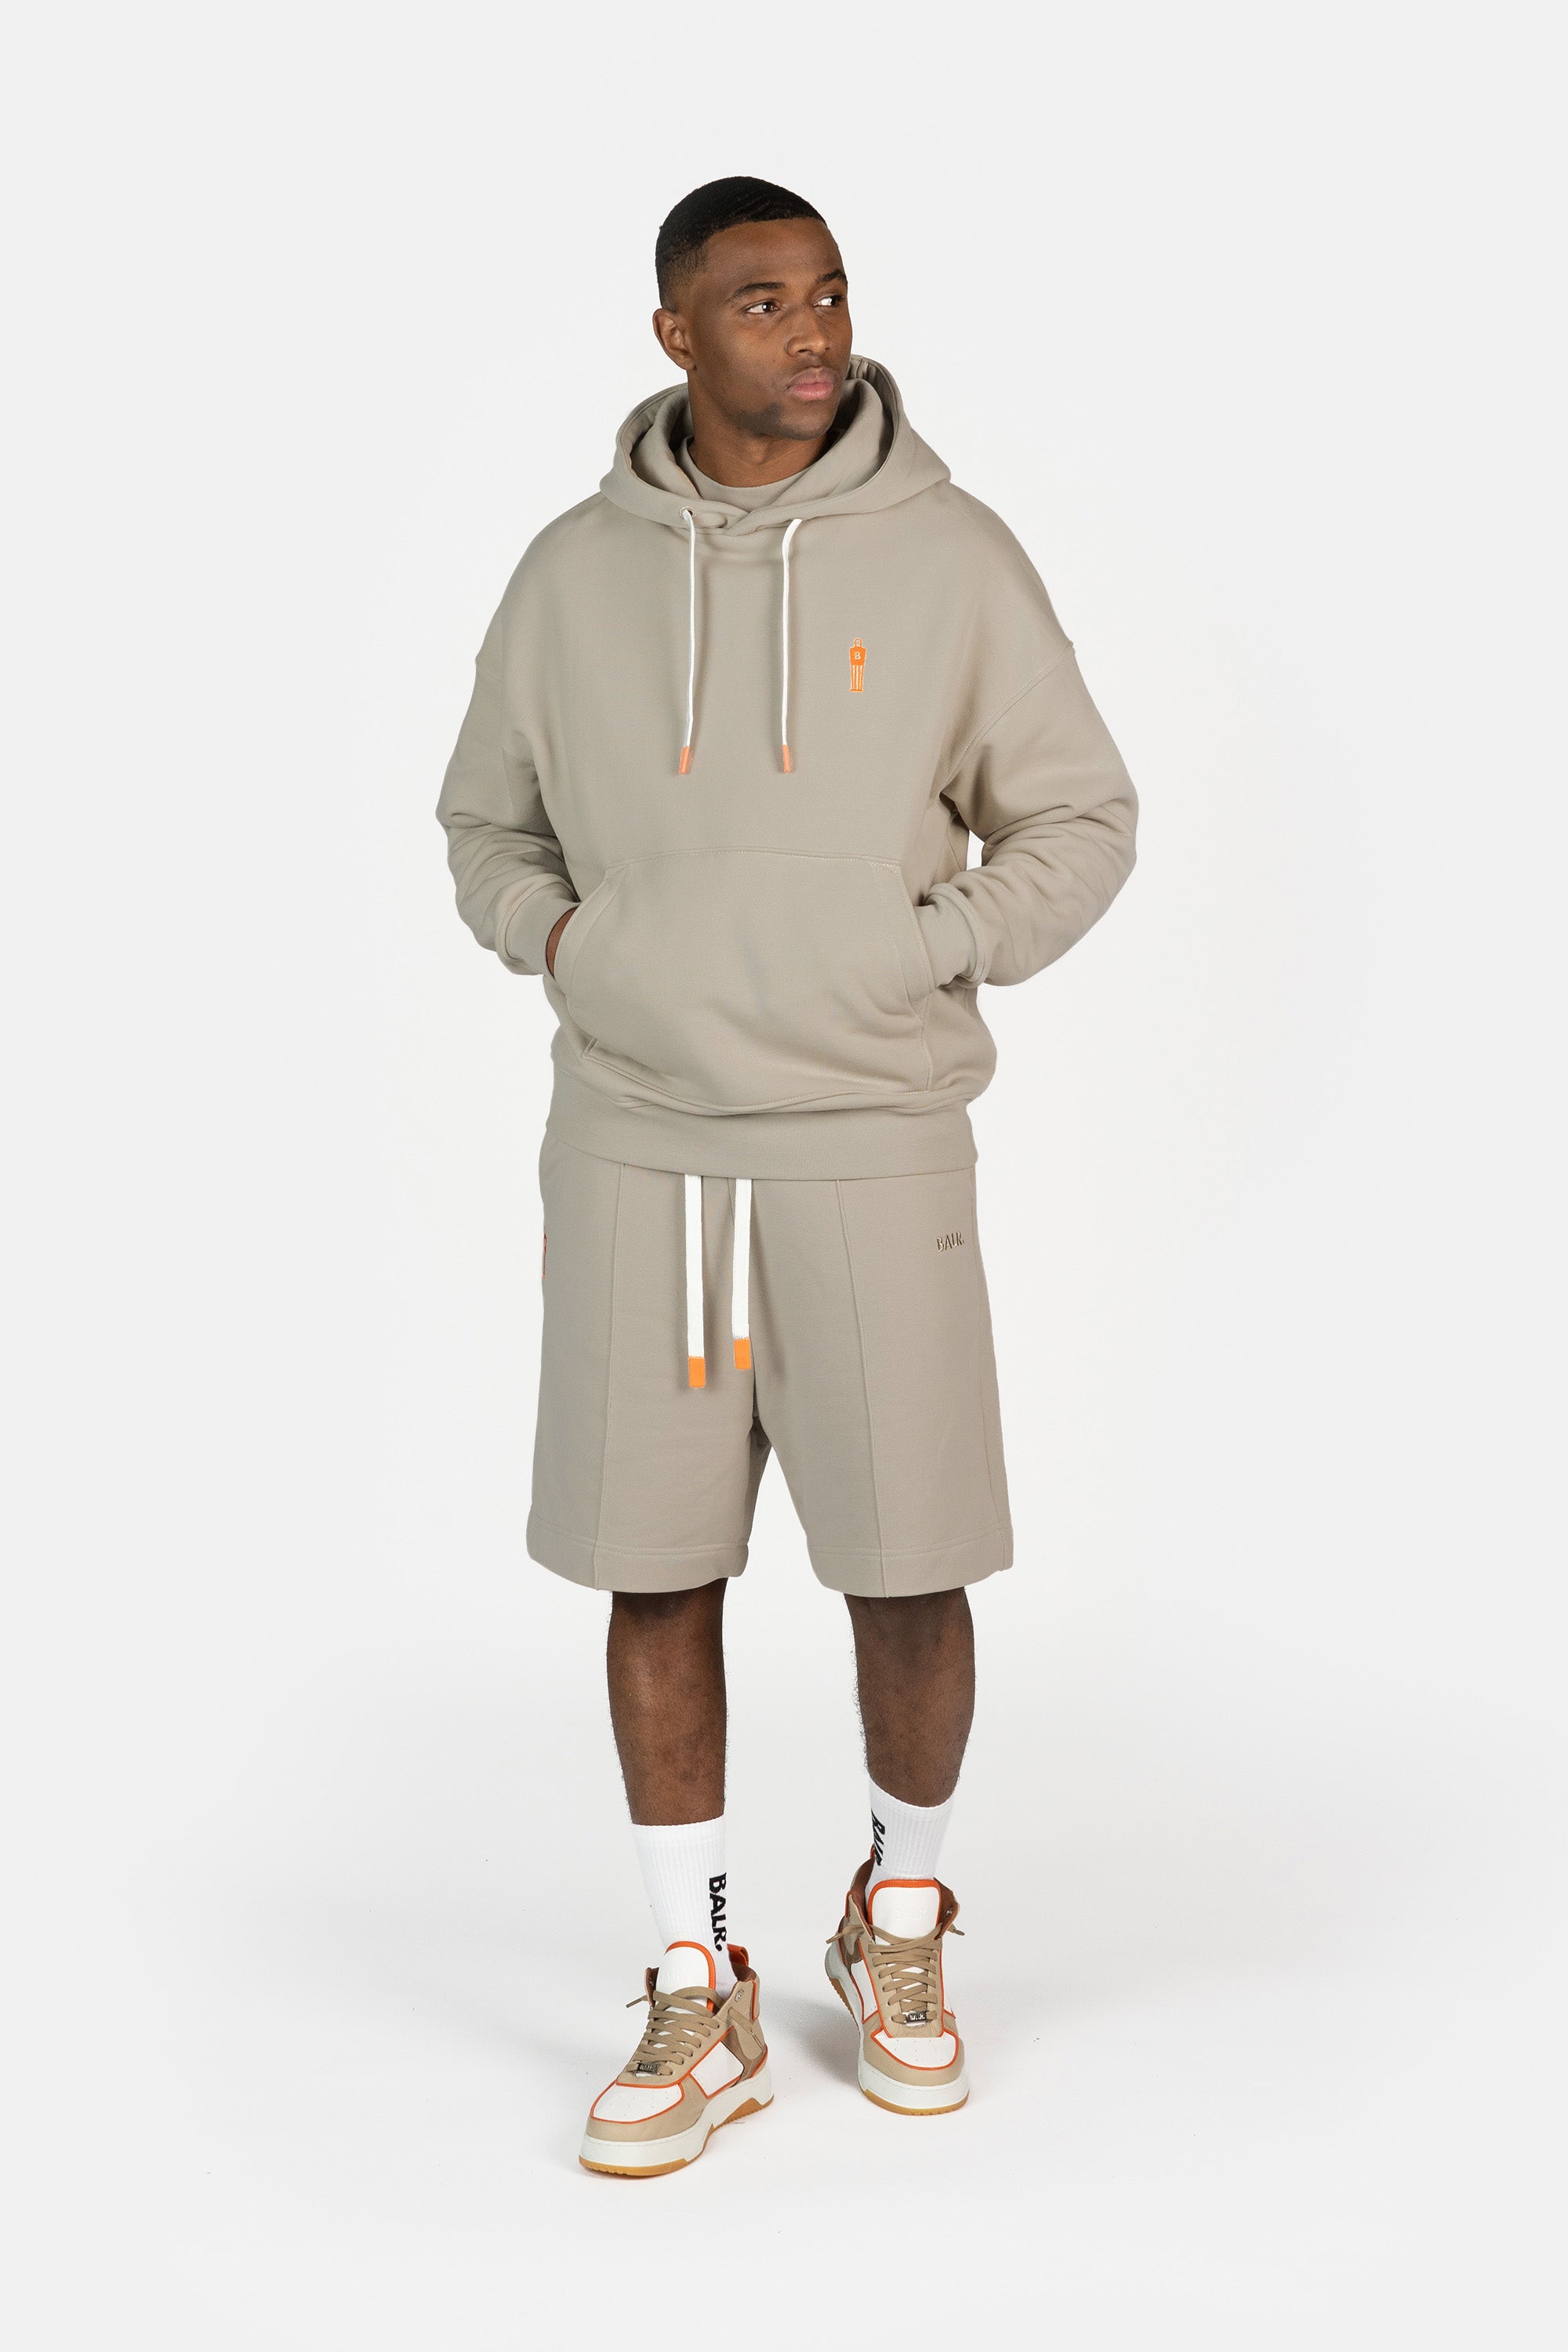 The Wall Box Fit Hoodie Silver Lining